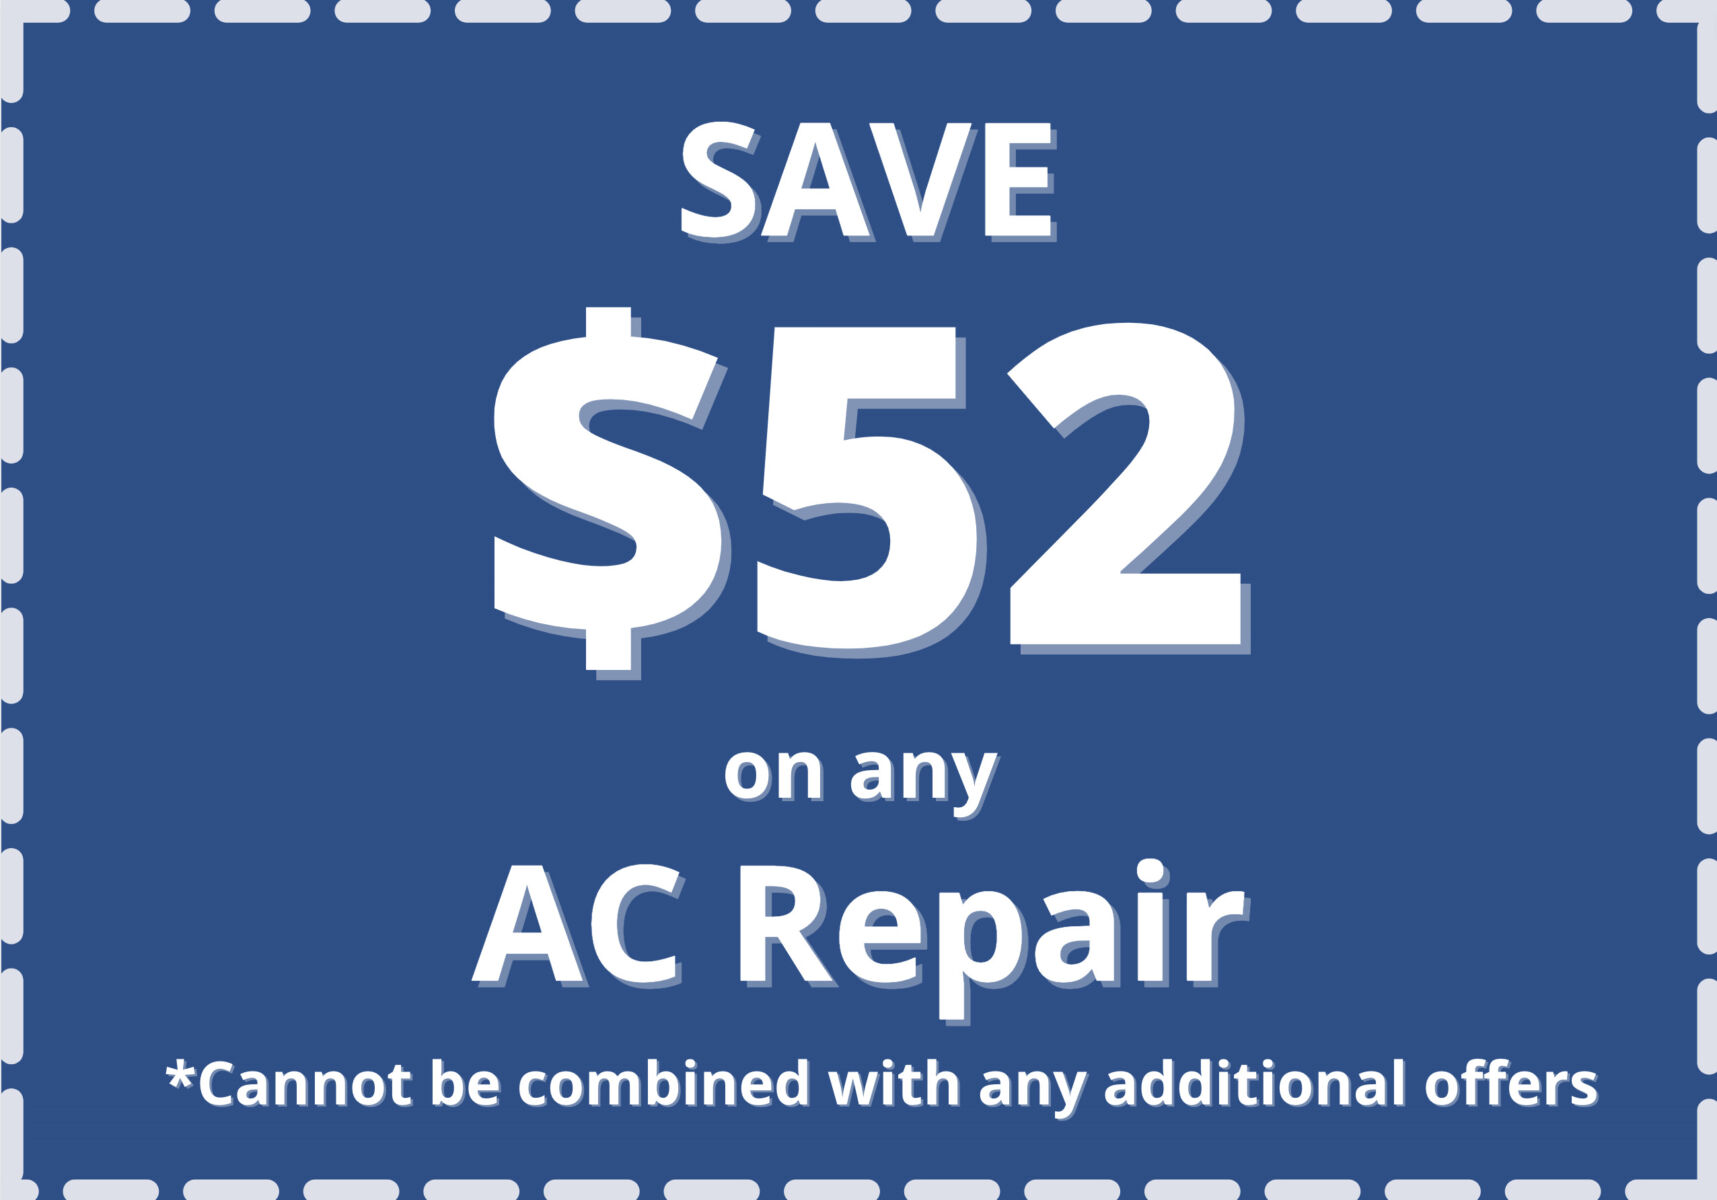 Save $52 on any AC Repair